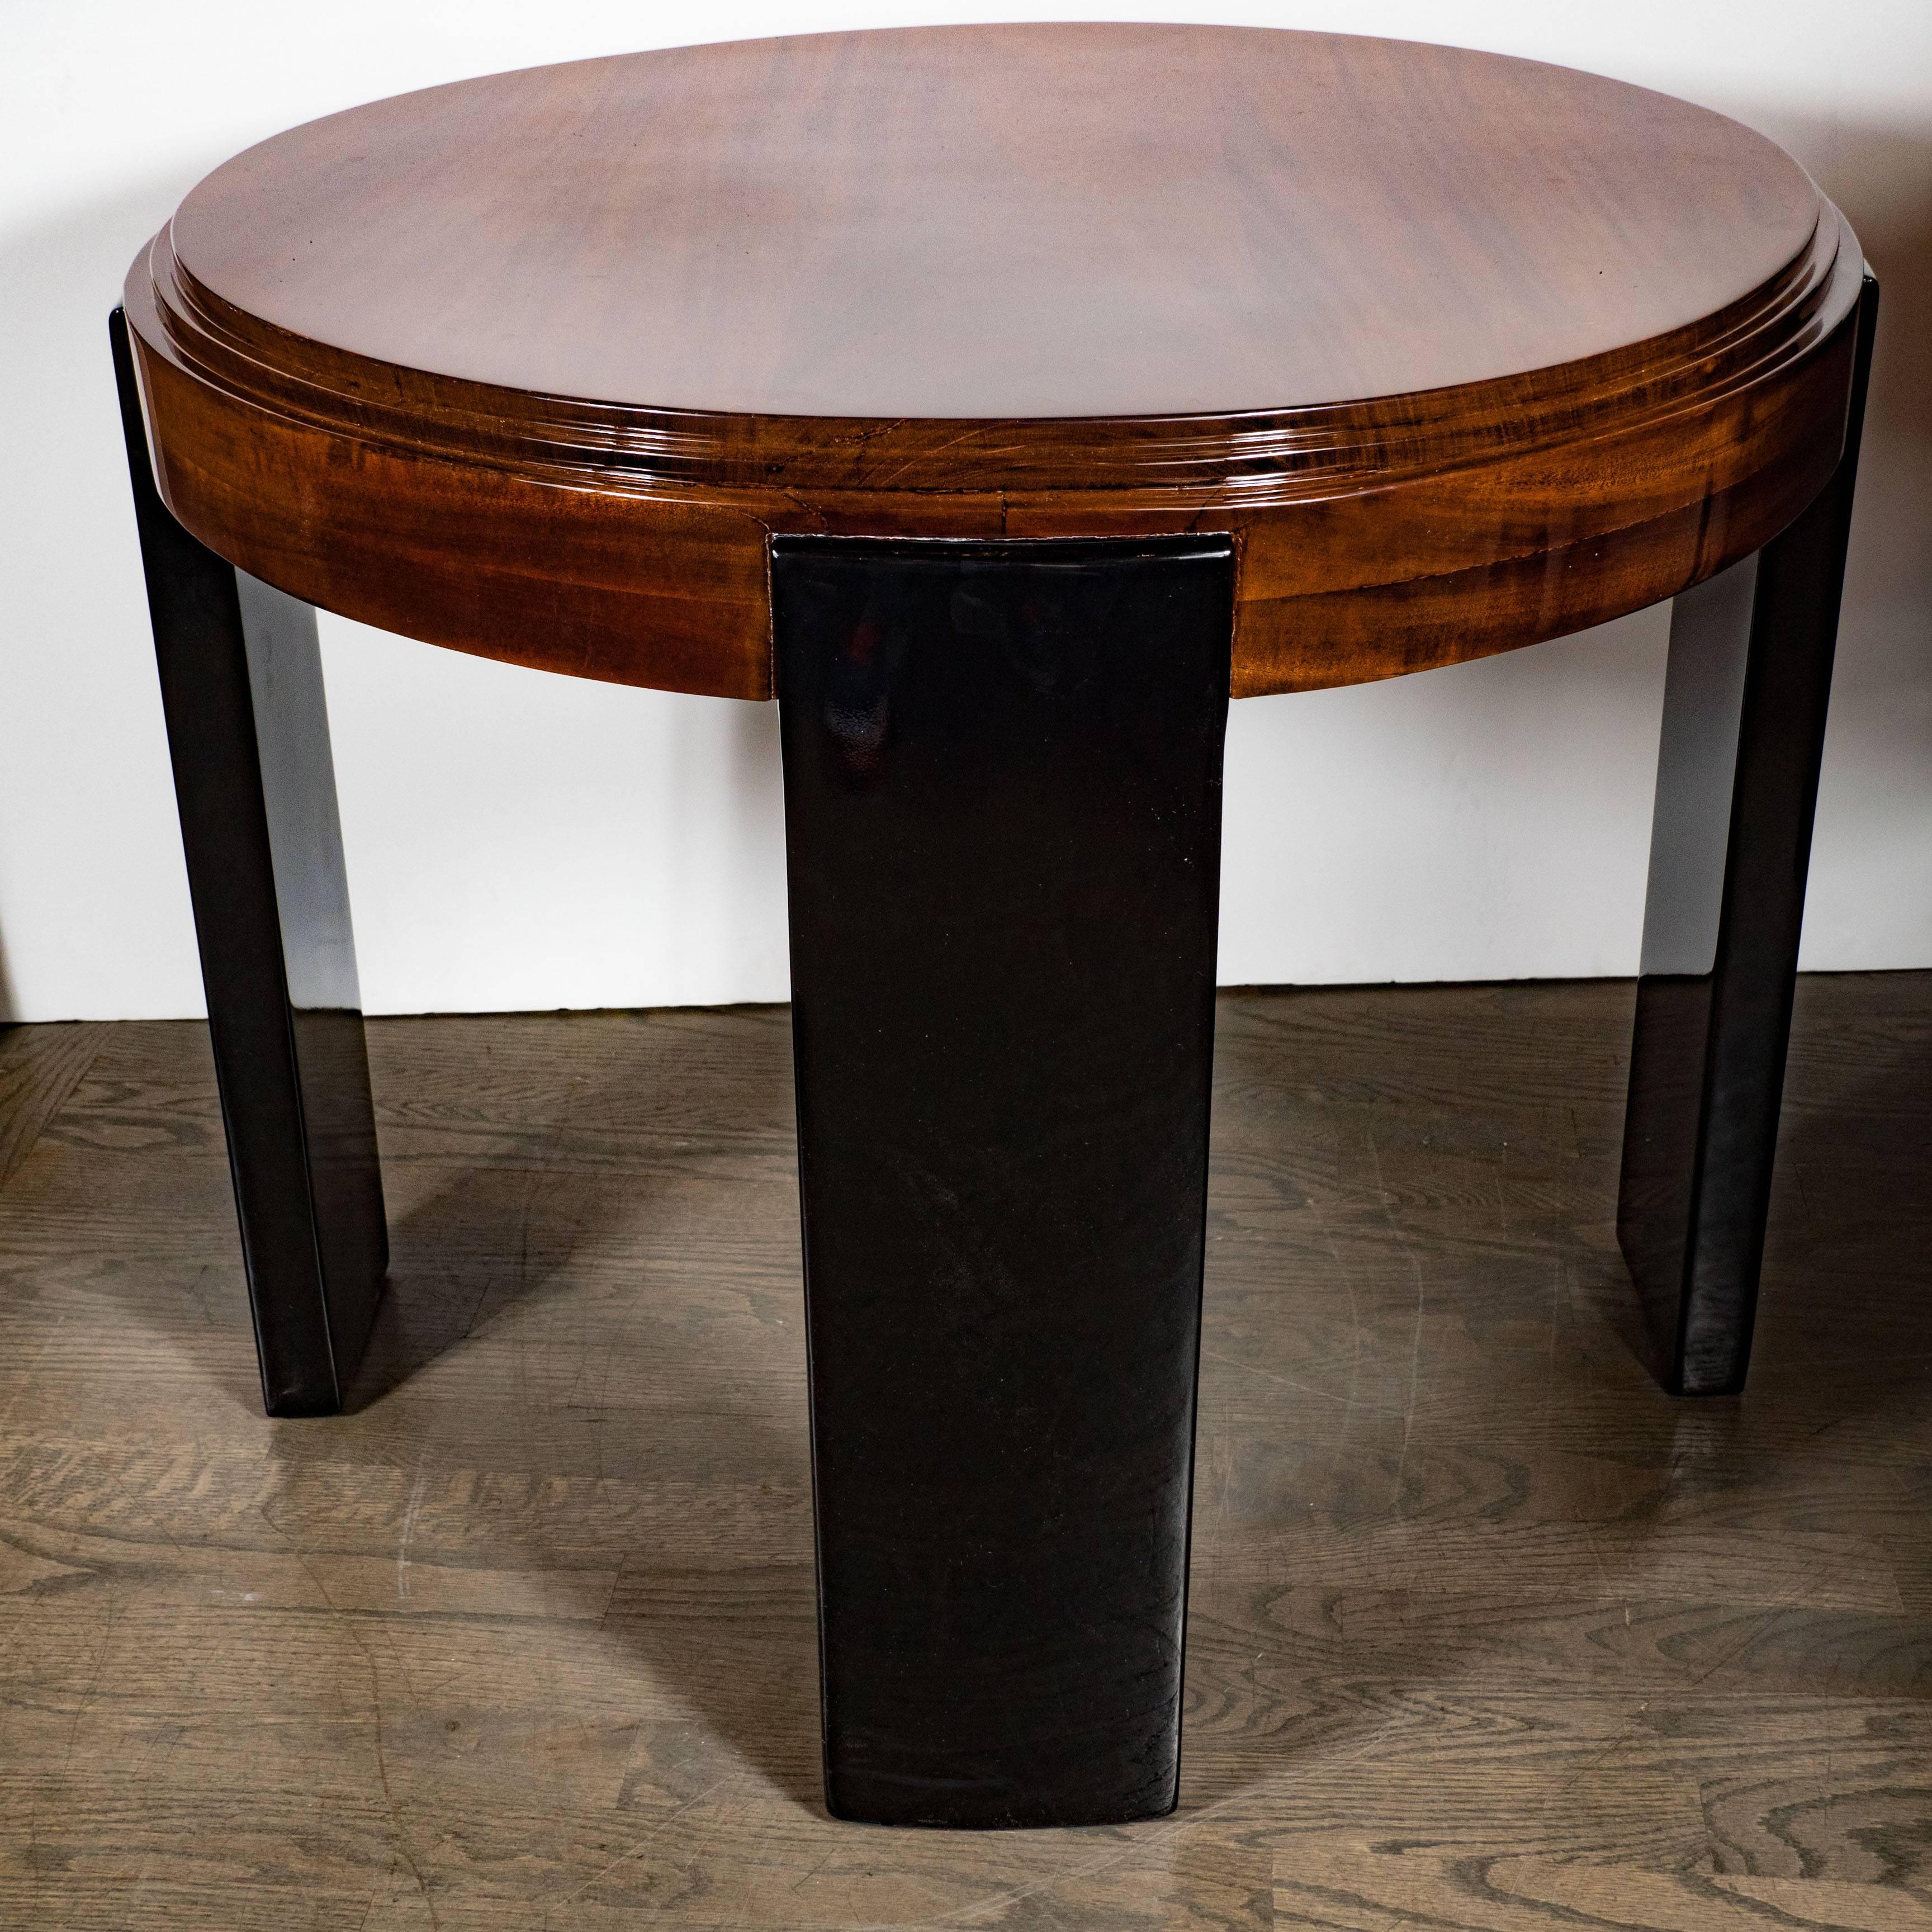 Ebonized Art Deco Skyscraper Style Stepped Detail Side Table with Black Lacquer Legs For Sale